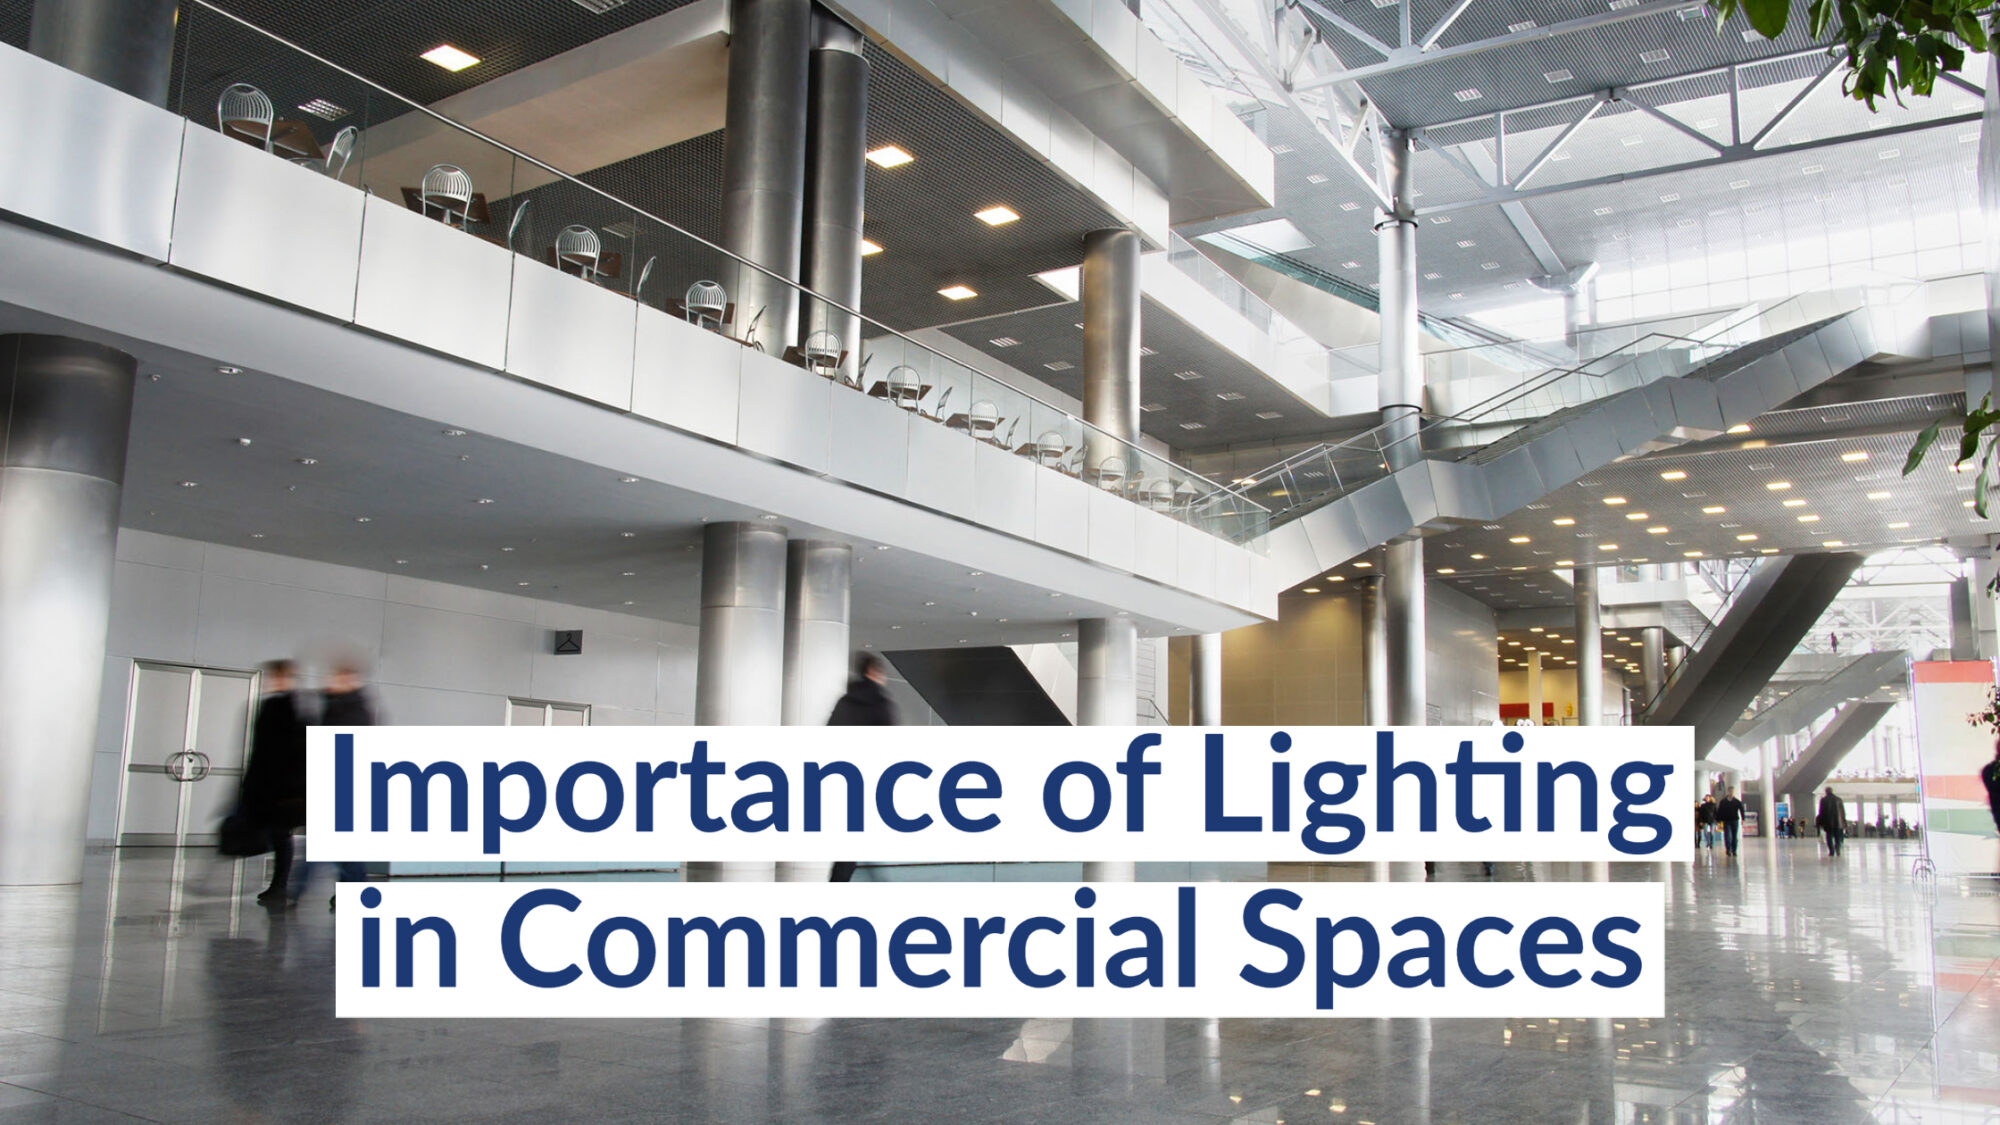 Importance of lighting in commercial spaces